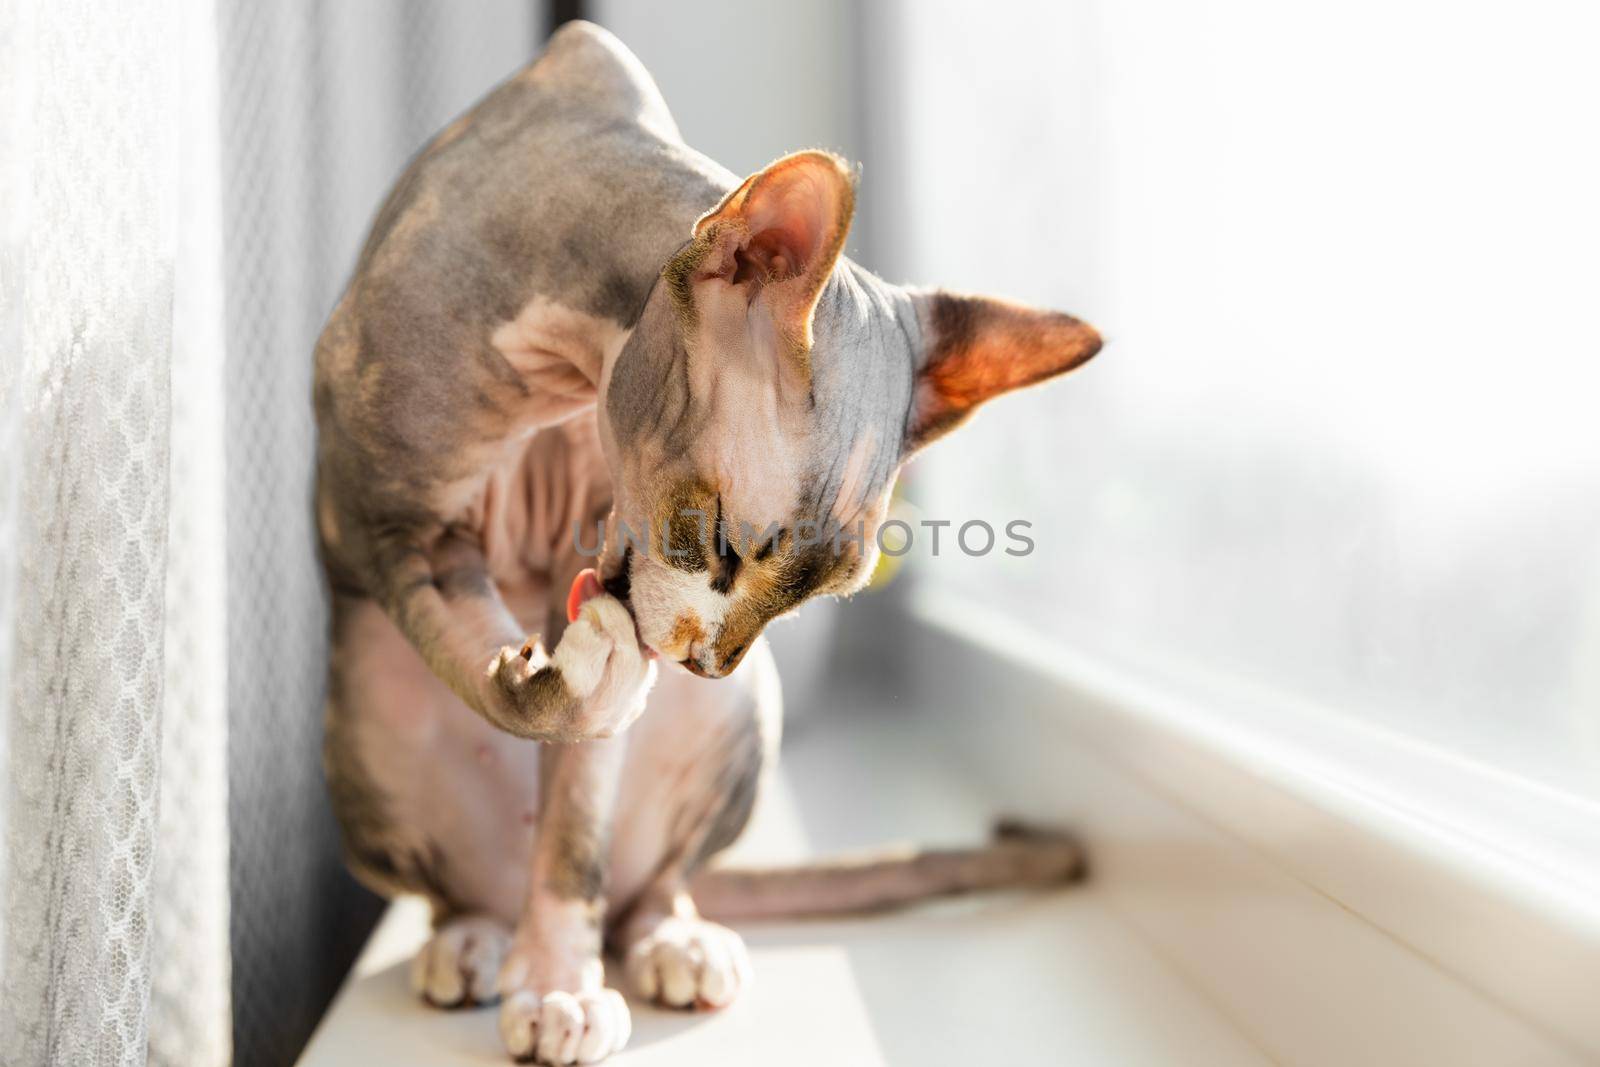 Cat grooming himself cleaning his paw while resting on window sill. Sphinx cat. Cat's rose tongue